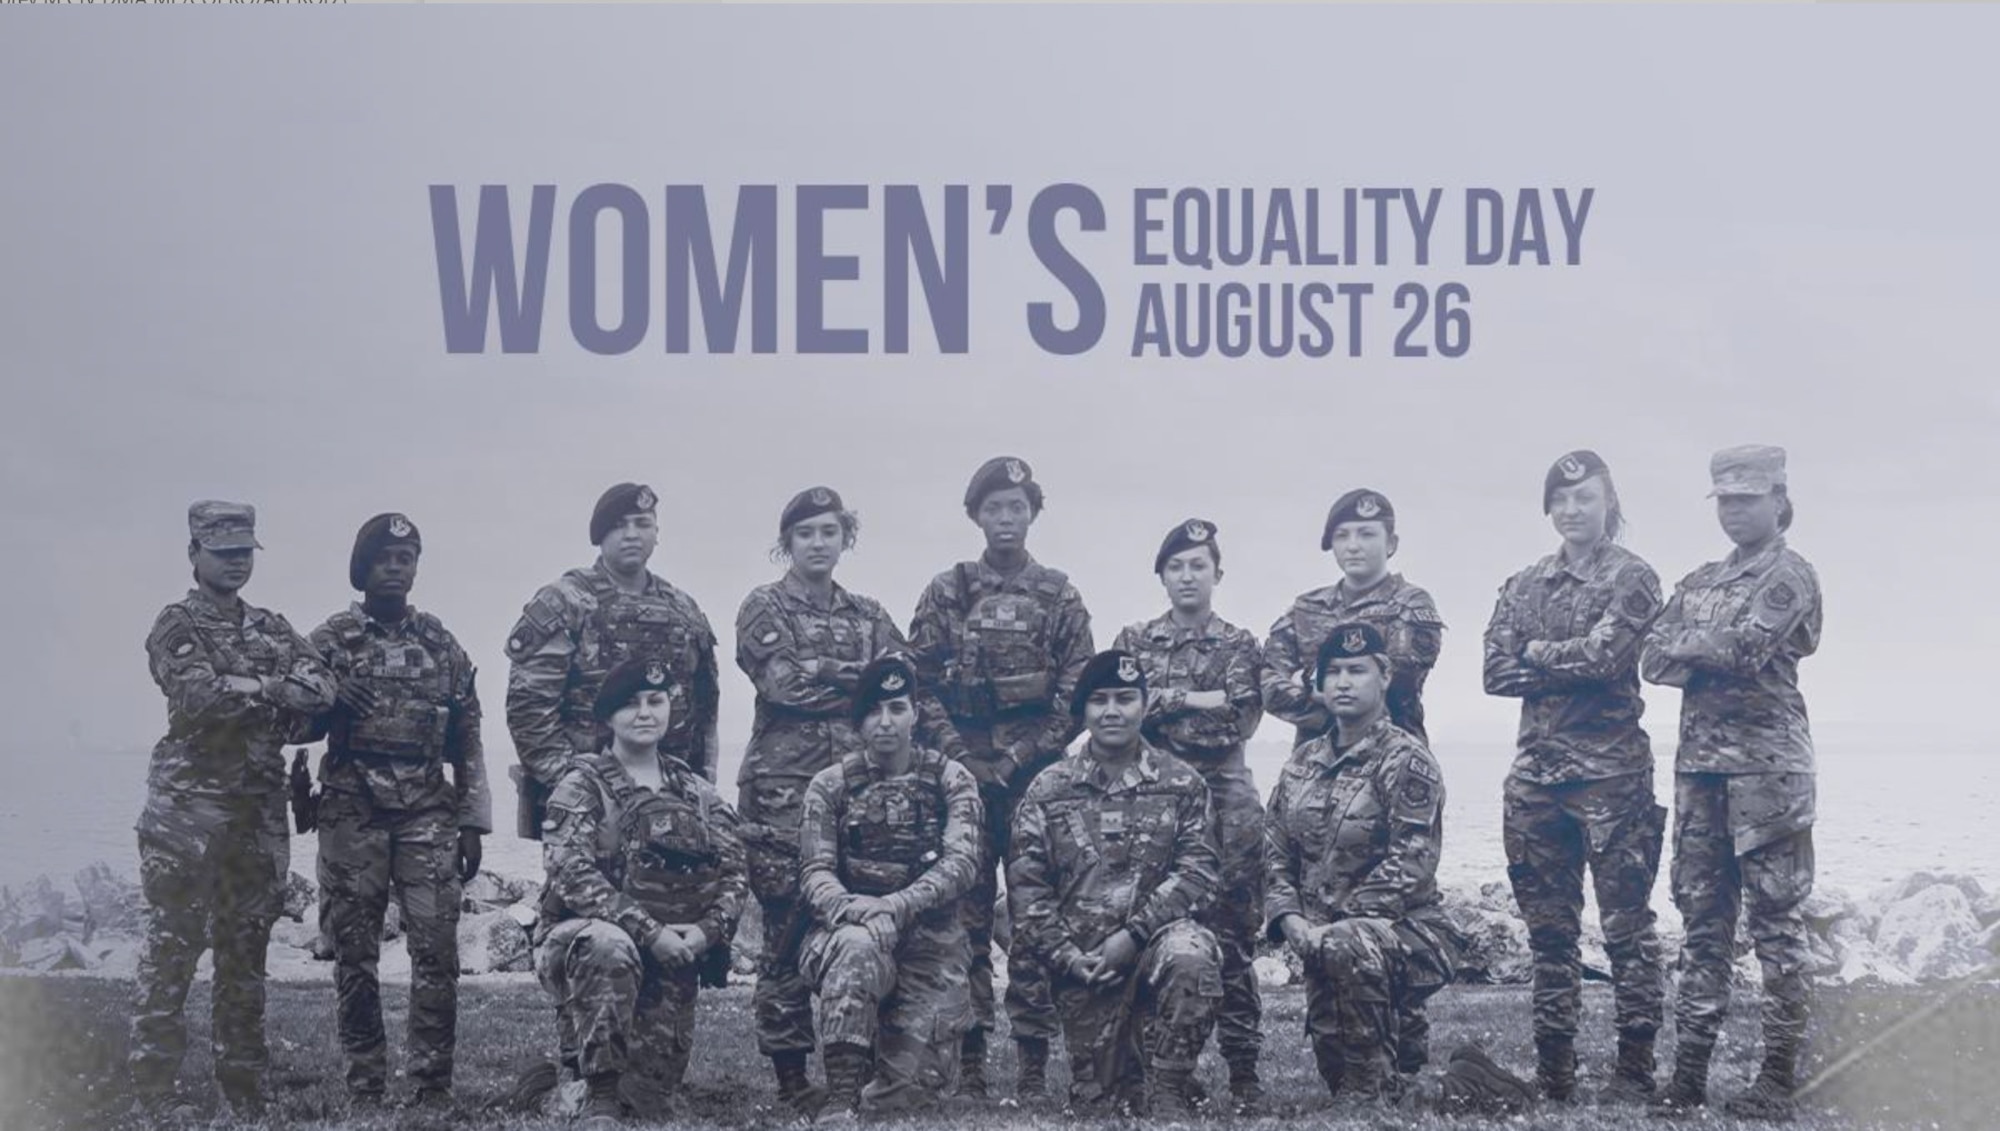 Women's Equality Day observance graphic